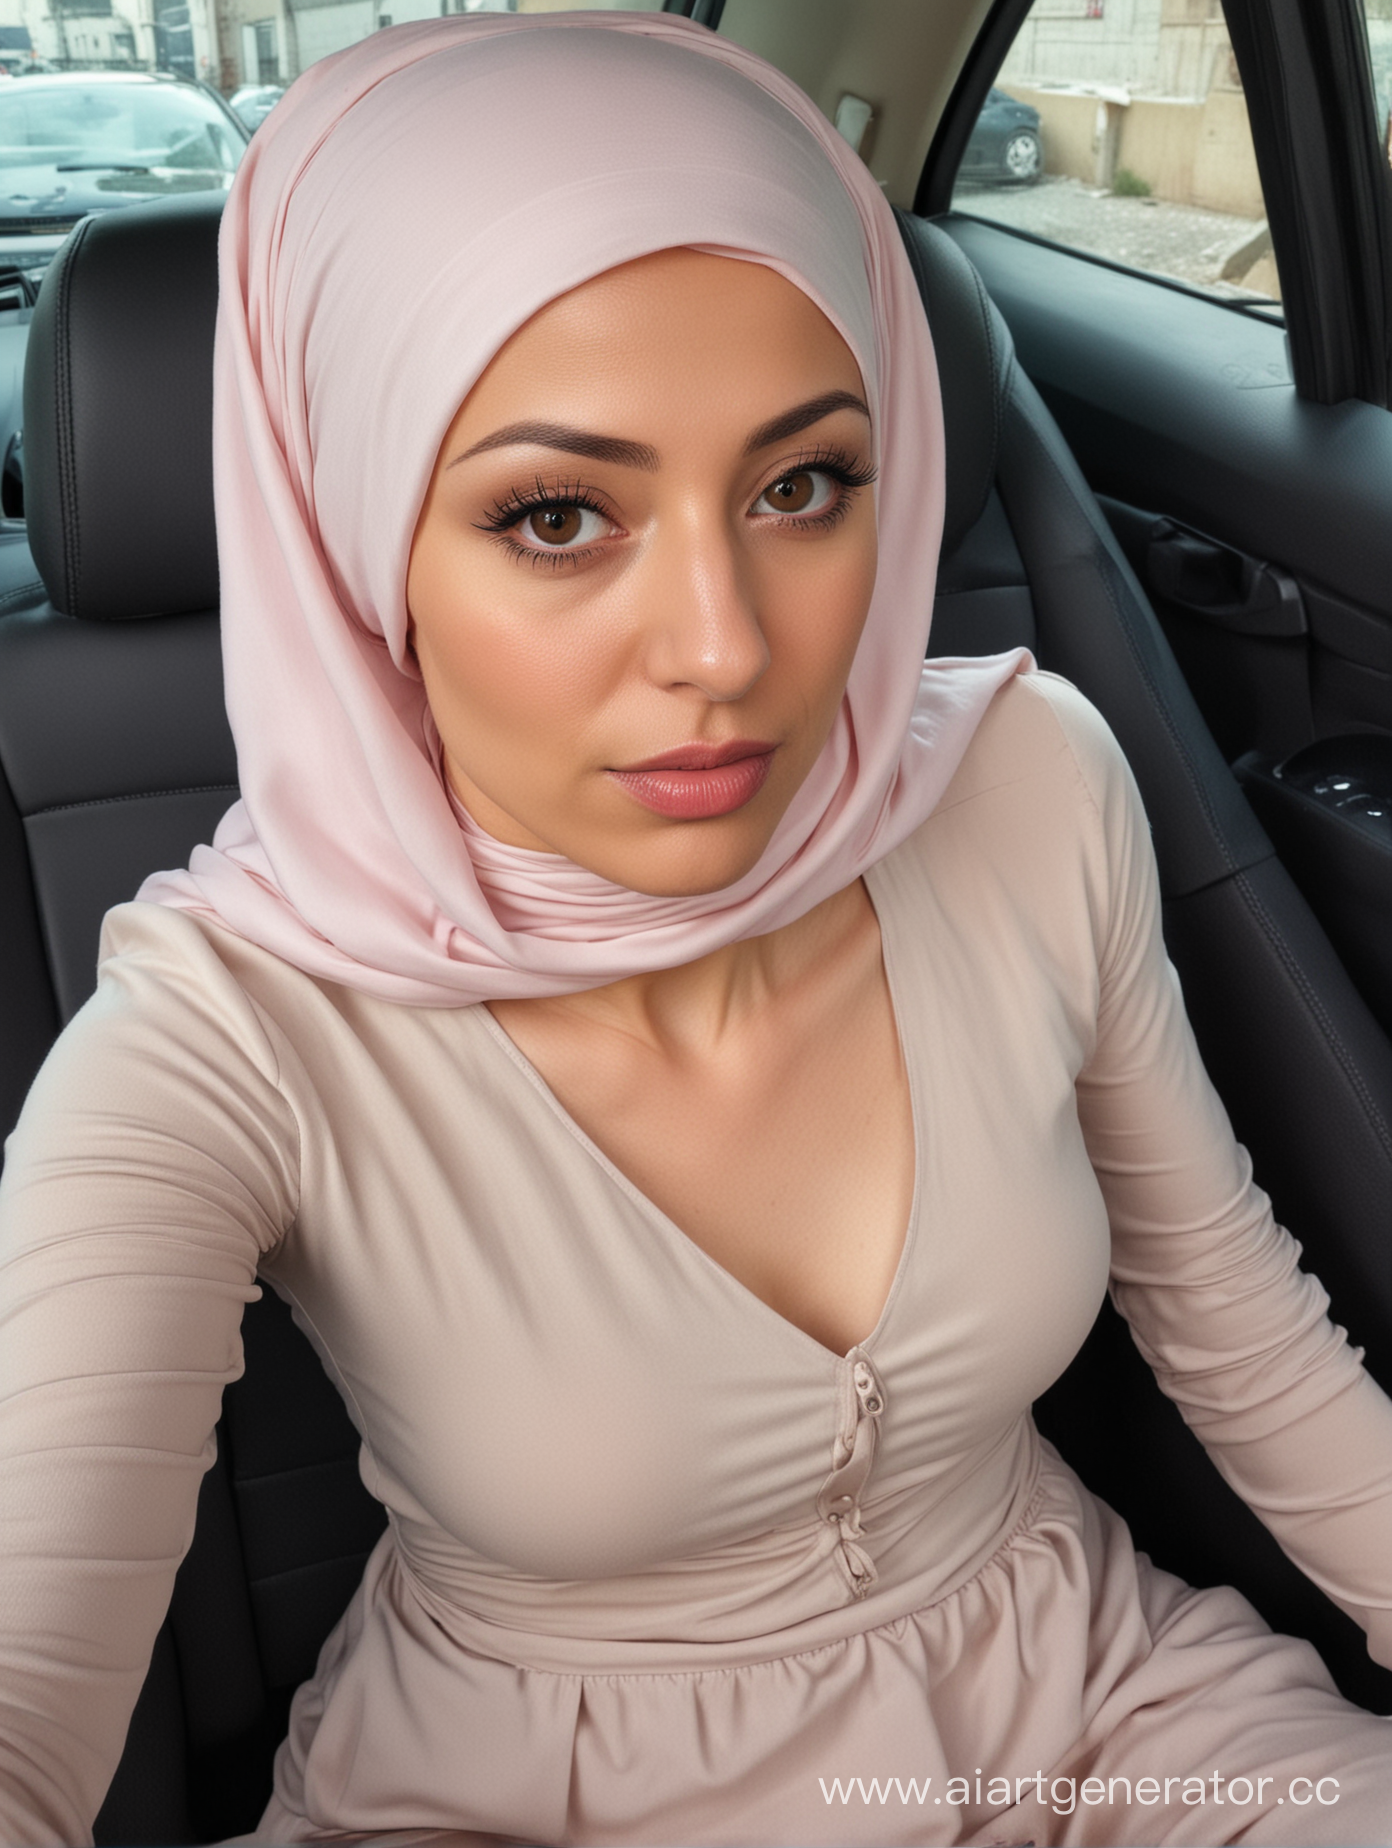 A petite woman, 35 years old, hijab, camisole, sits car seat, from above, top view, italian, hairless, plump body. She is in pain. Tight
tits, intense makeup, pov